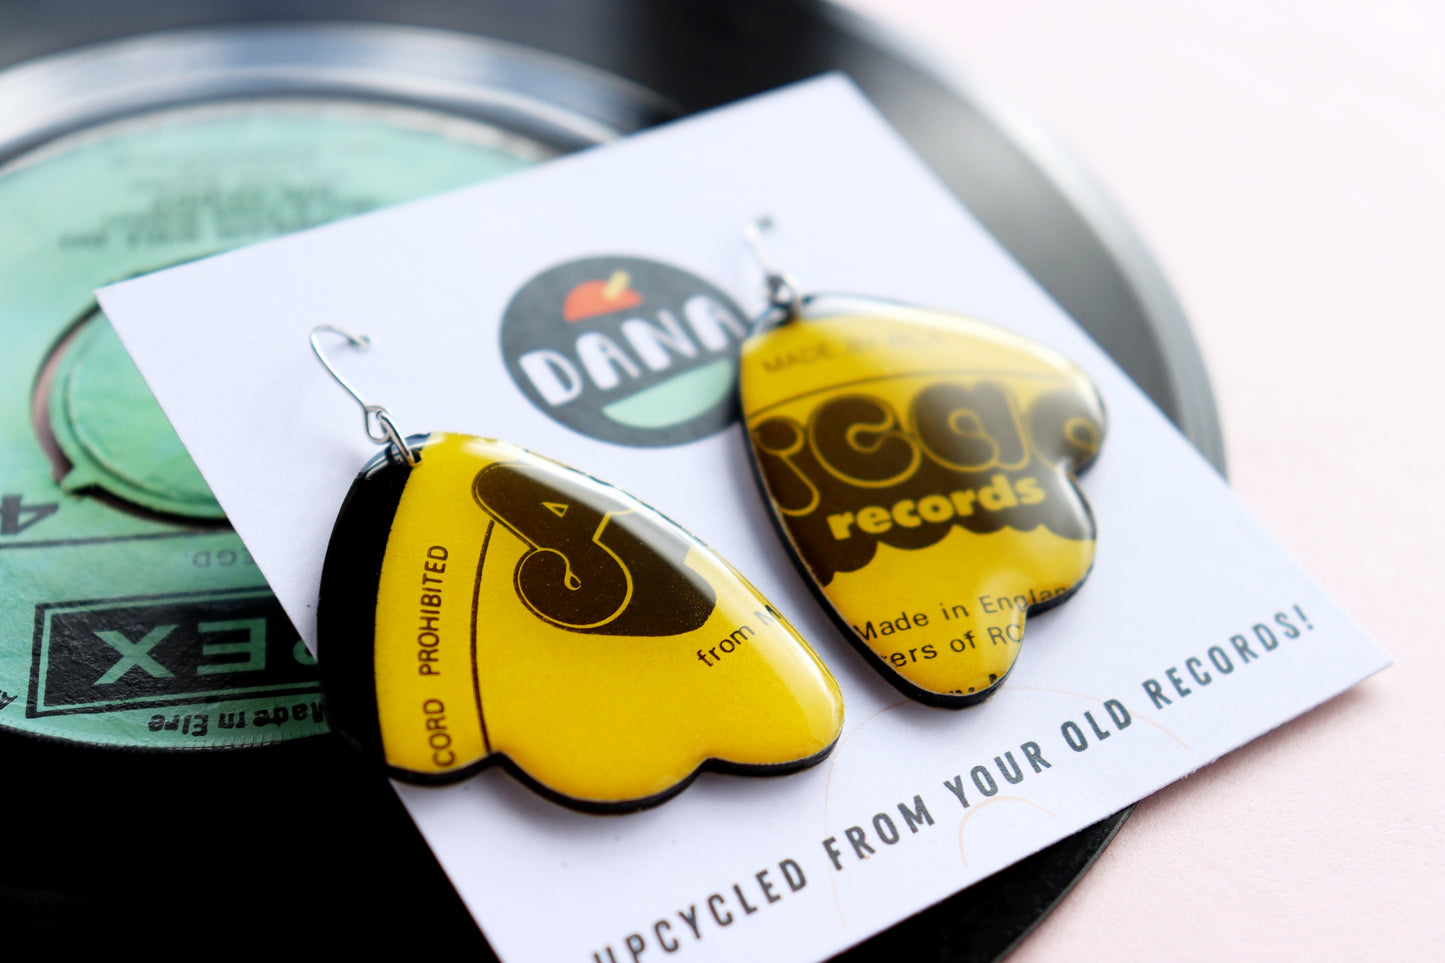 Quirky bright yellow Arcade repurposed vinyl record earrings